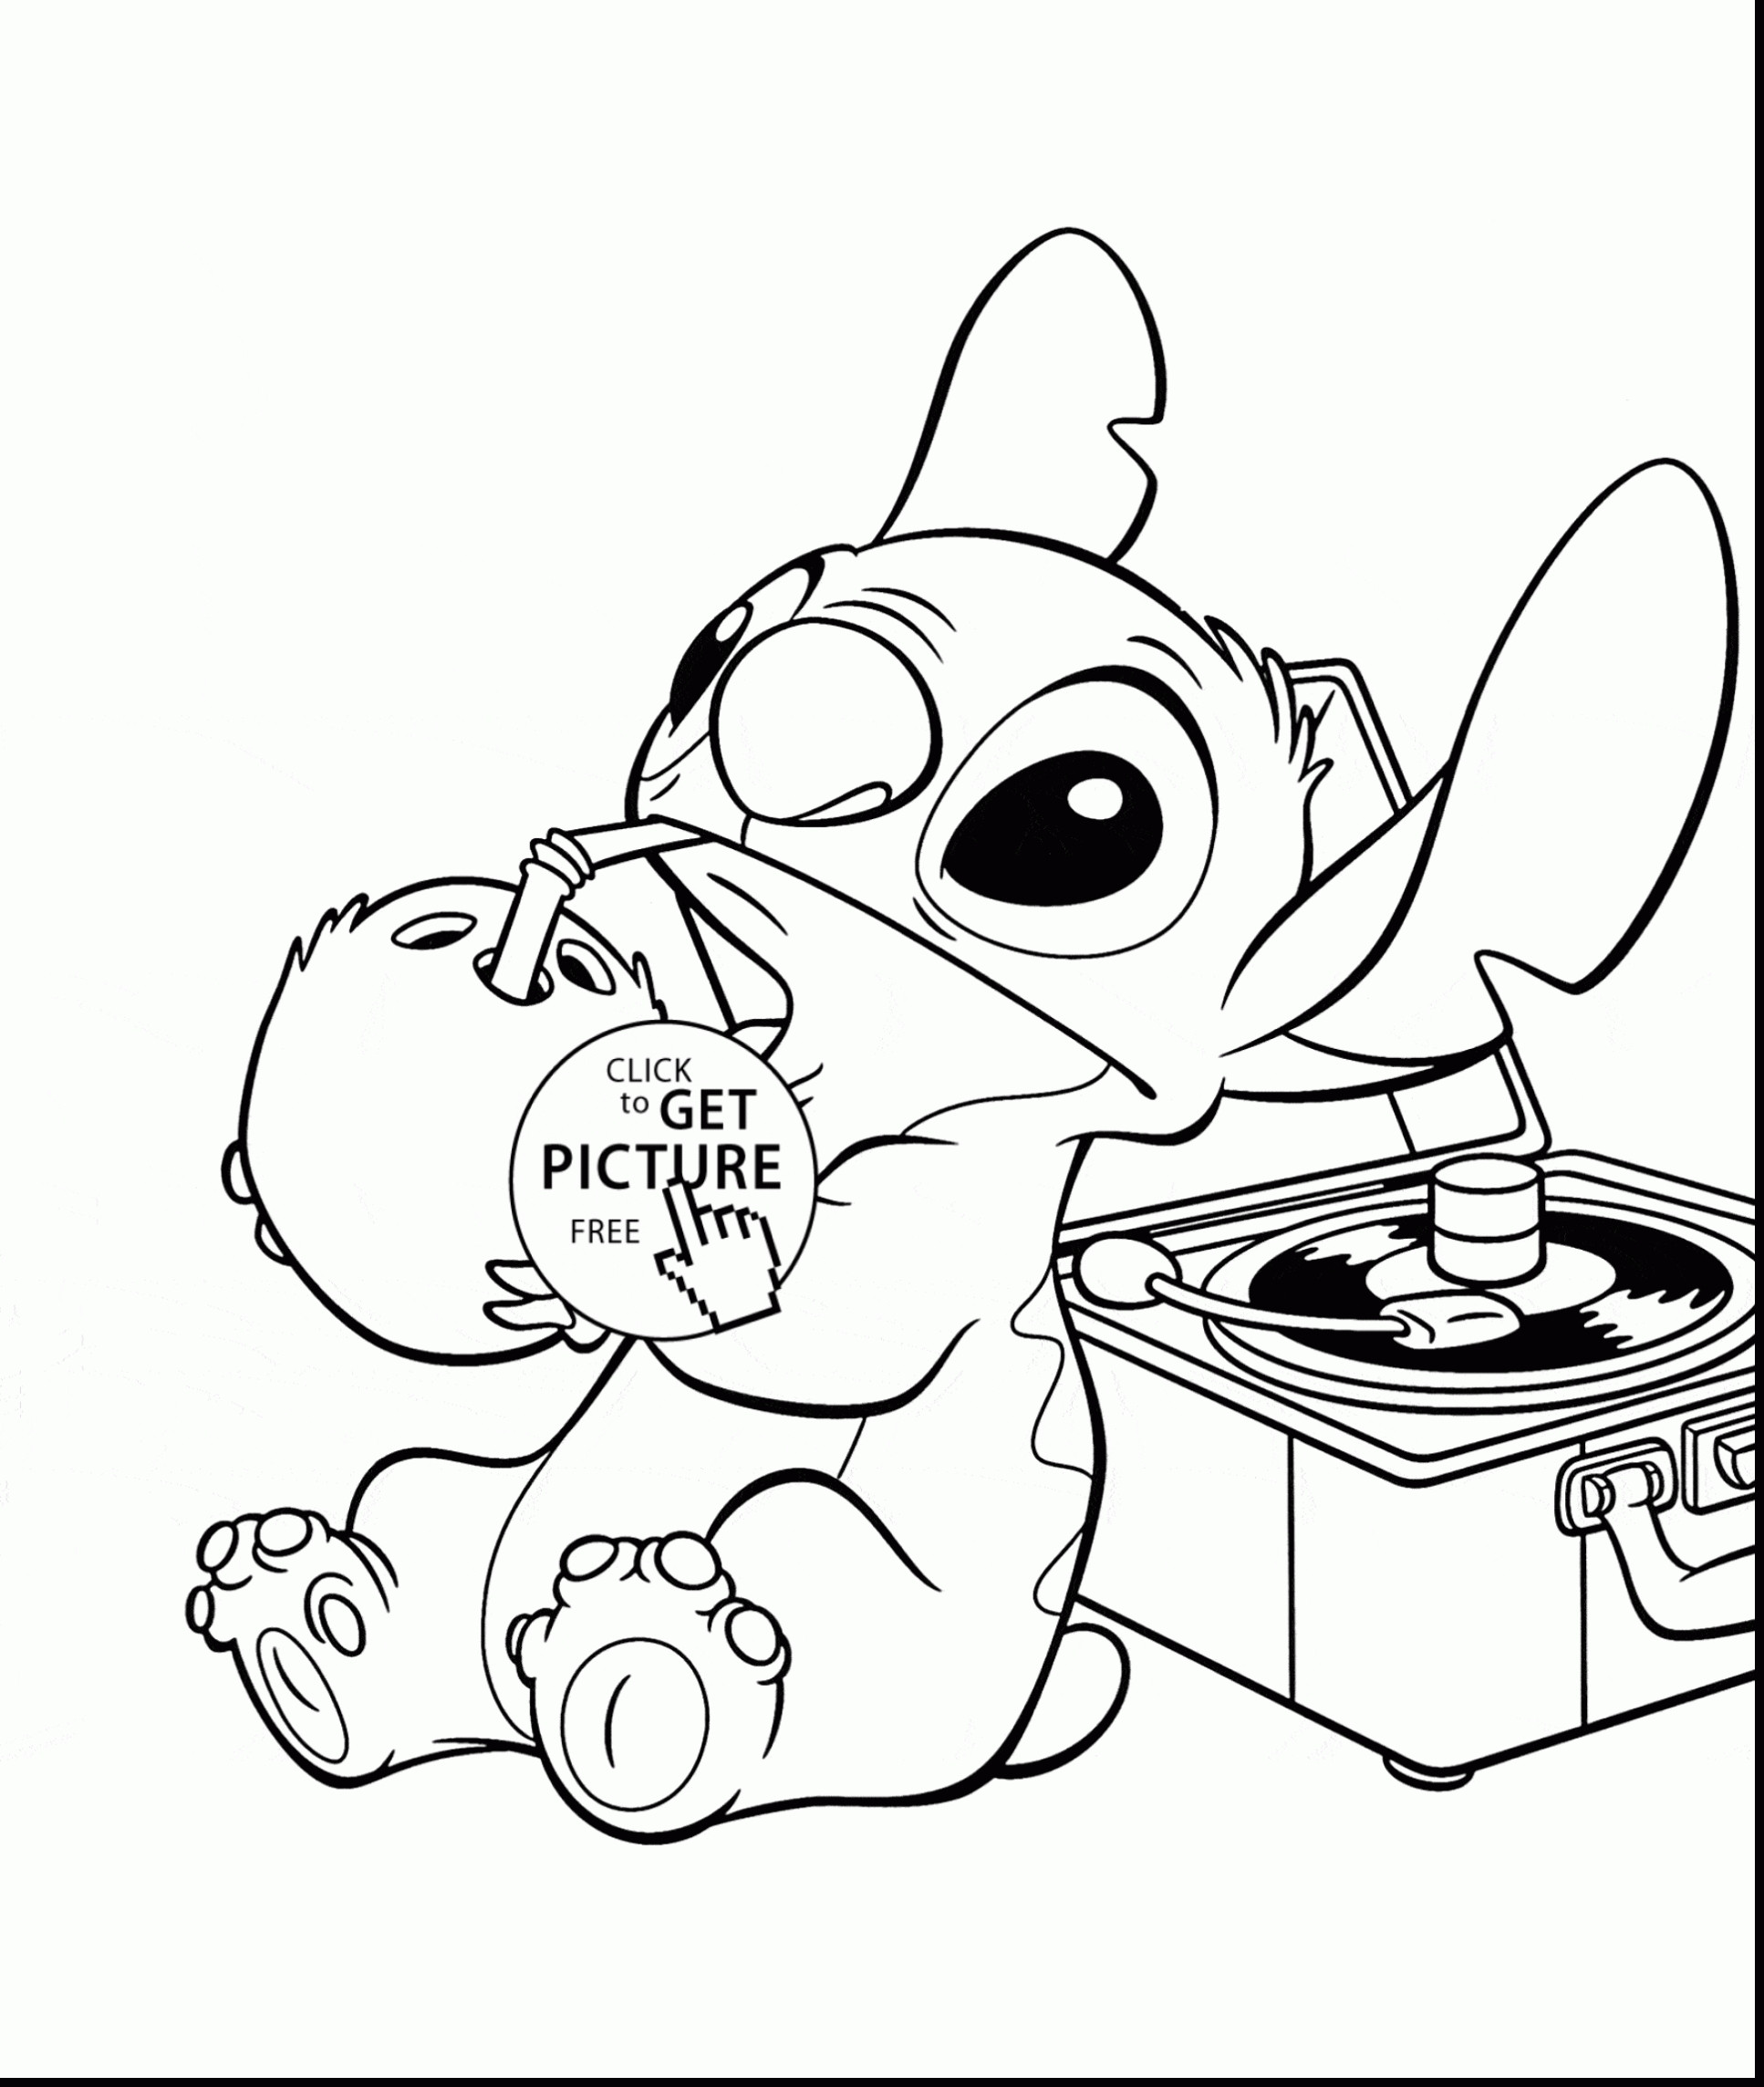 Ohana Coloring Pages
 Lilo and Stitch Ohana Coloring Pages Free